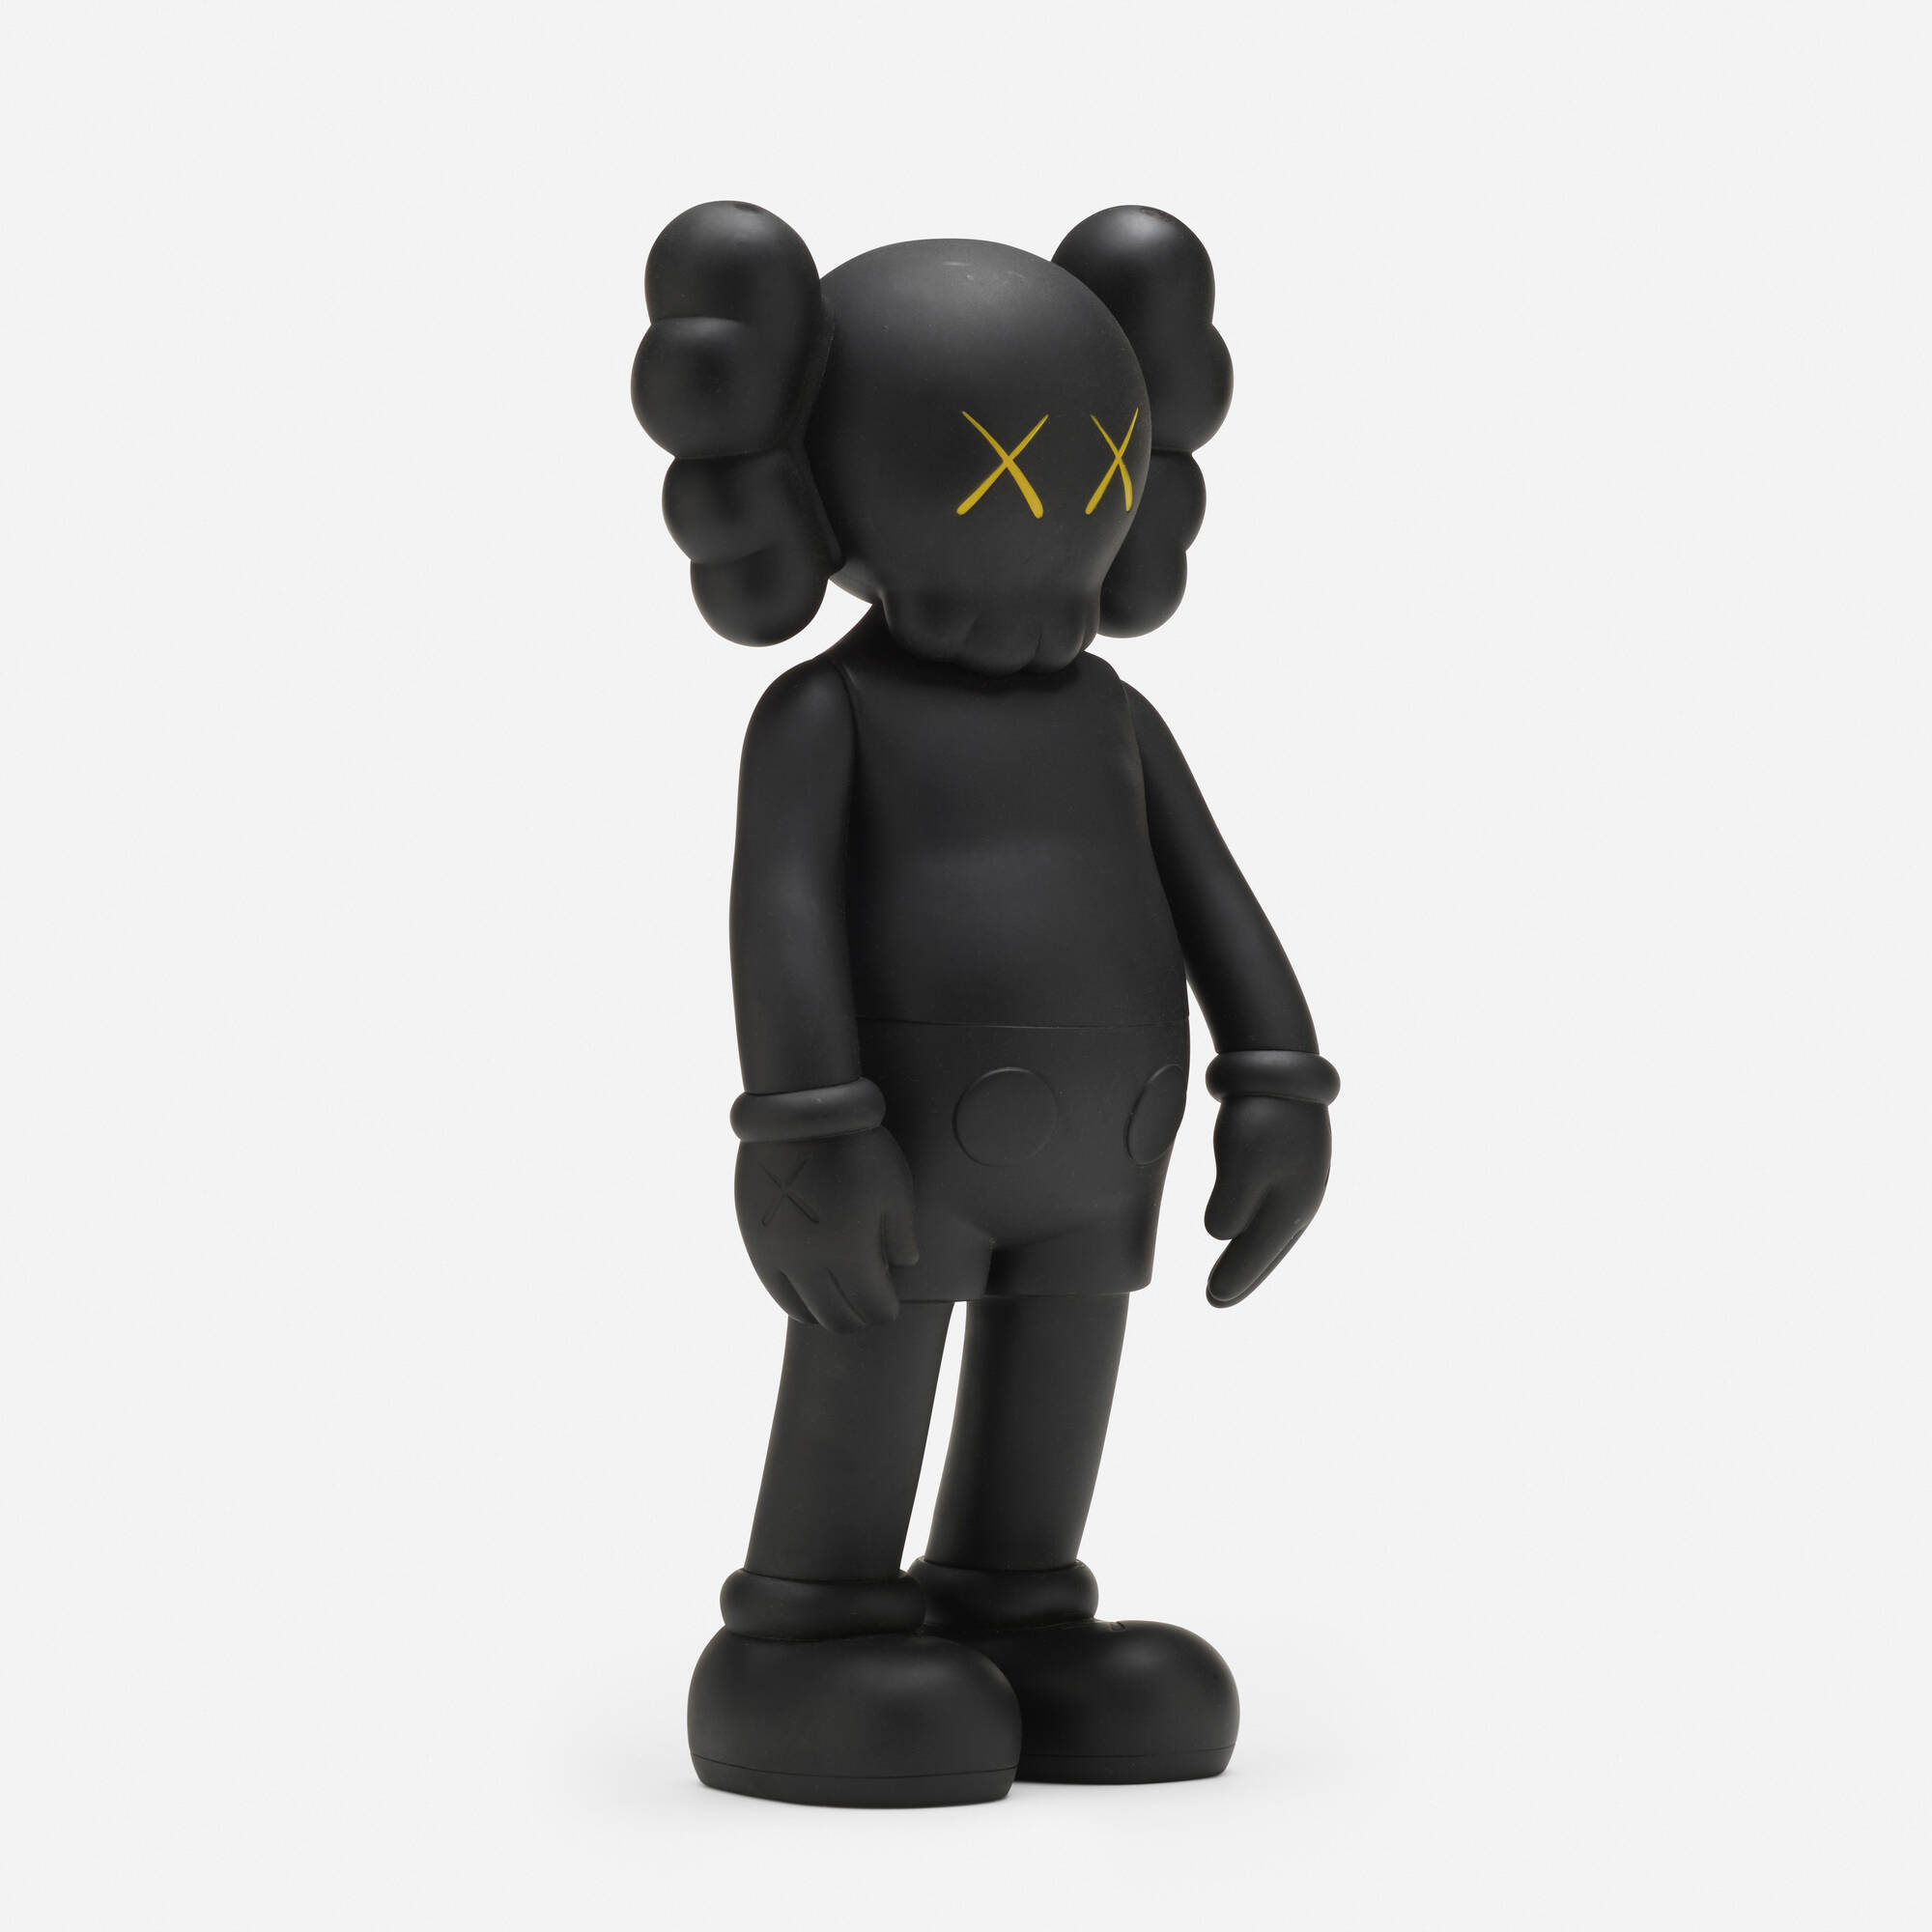 104: KAWS (BRIAN DONNELLY), Five Years Later Companion (Black 